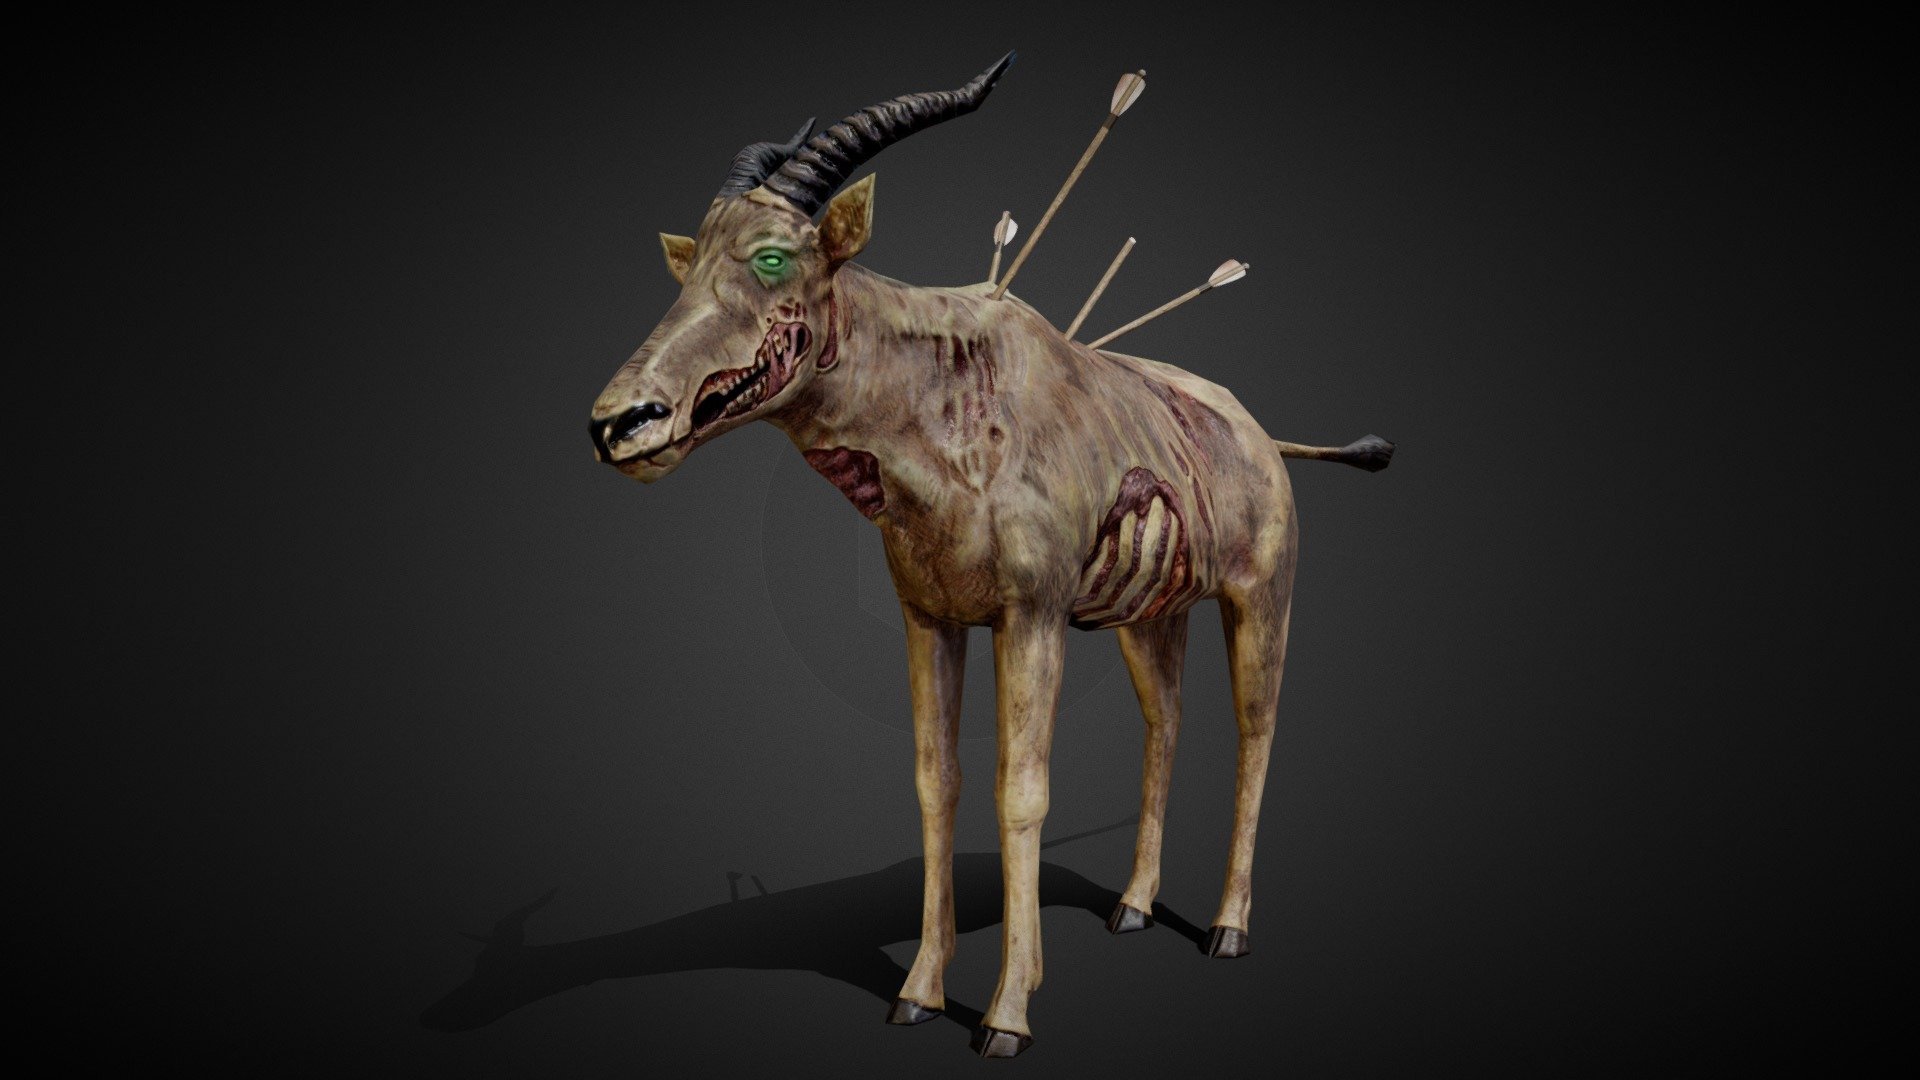 Damaliscus Zombie was made as event version of Damaliscus animal for the mobile game Wild Hunt for Ten Square Games. Retexturing made in Substance Painter.

Original version of animal created by Mateusz Bogusz. Artstation: https://www.artstation.com/bogi - Damaliscus Zombie - 3D model by shearaell 3d model